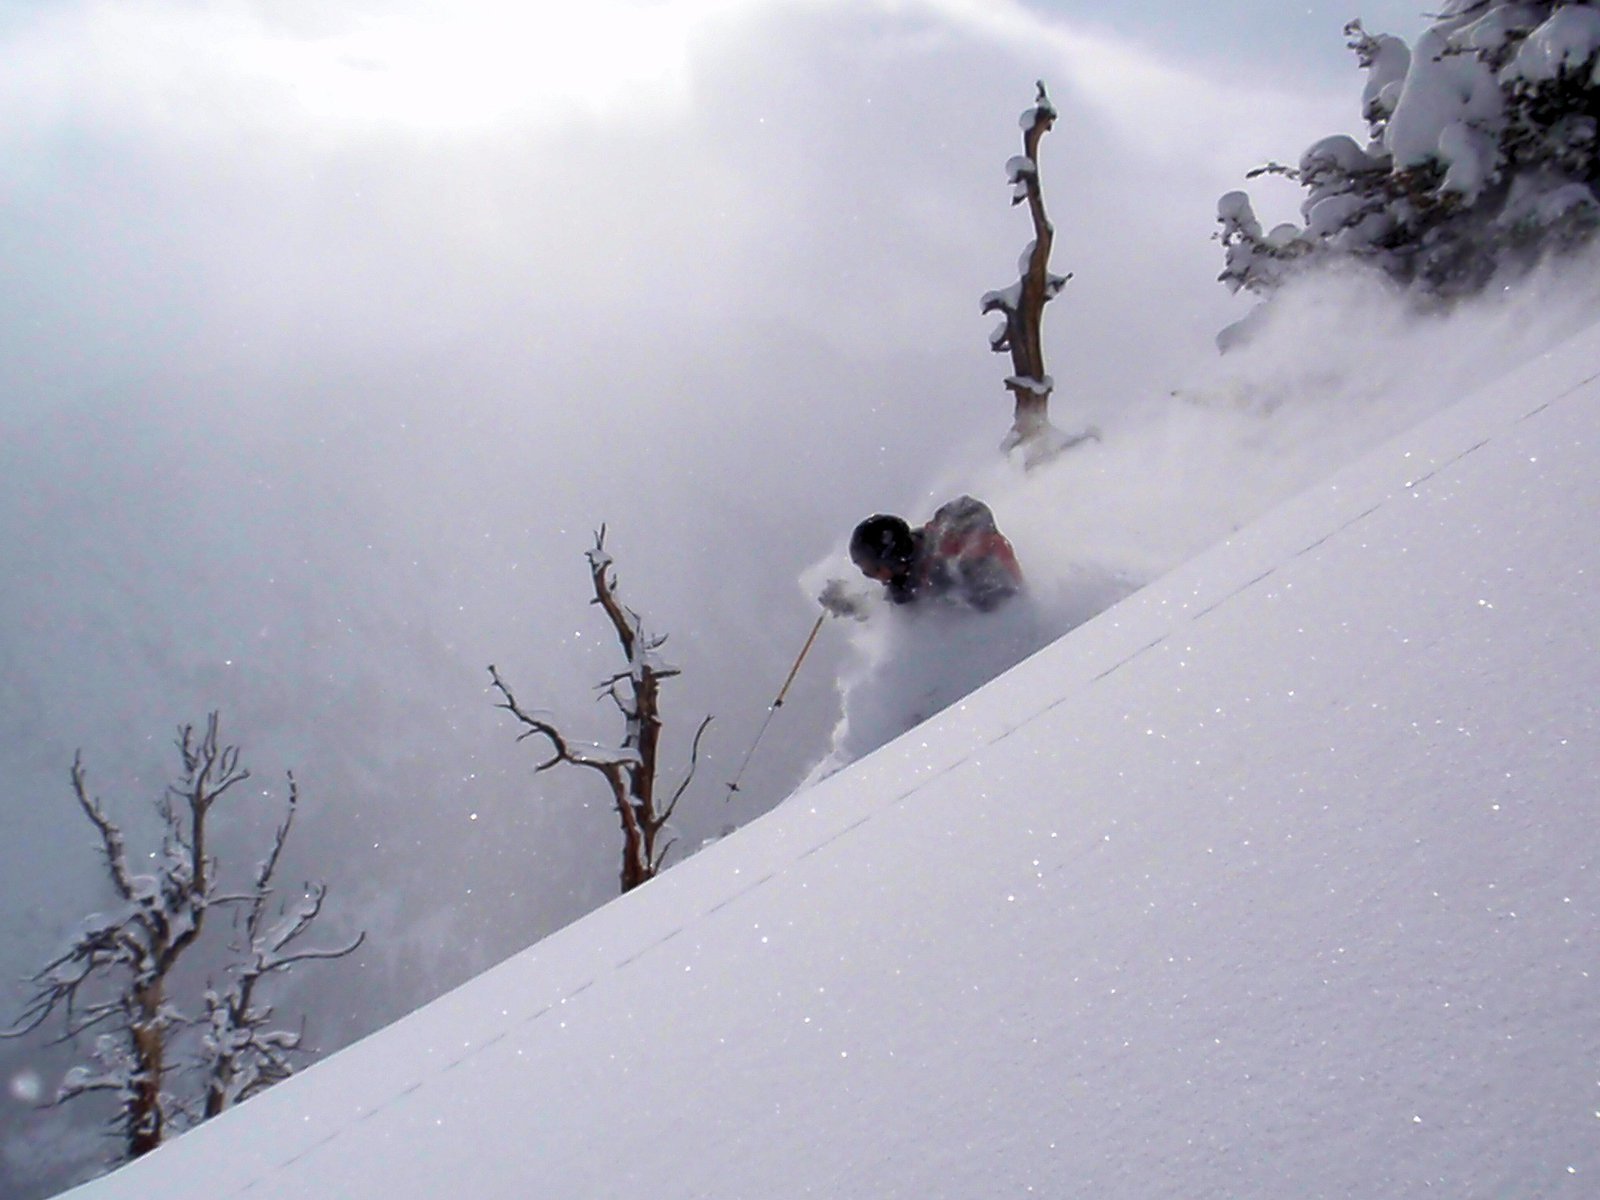 More Wasatch Pow 2